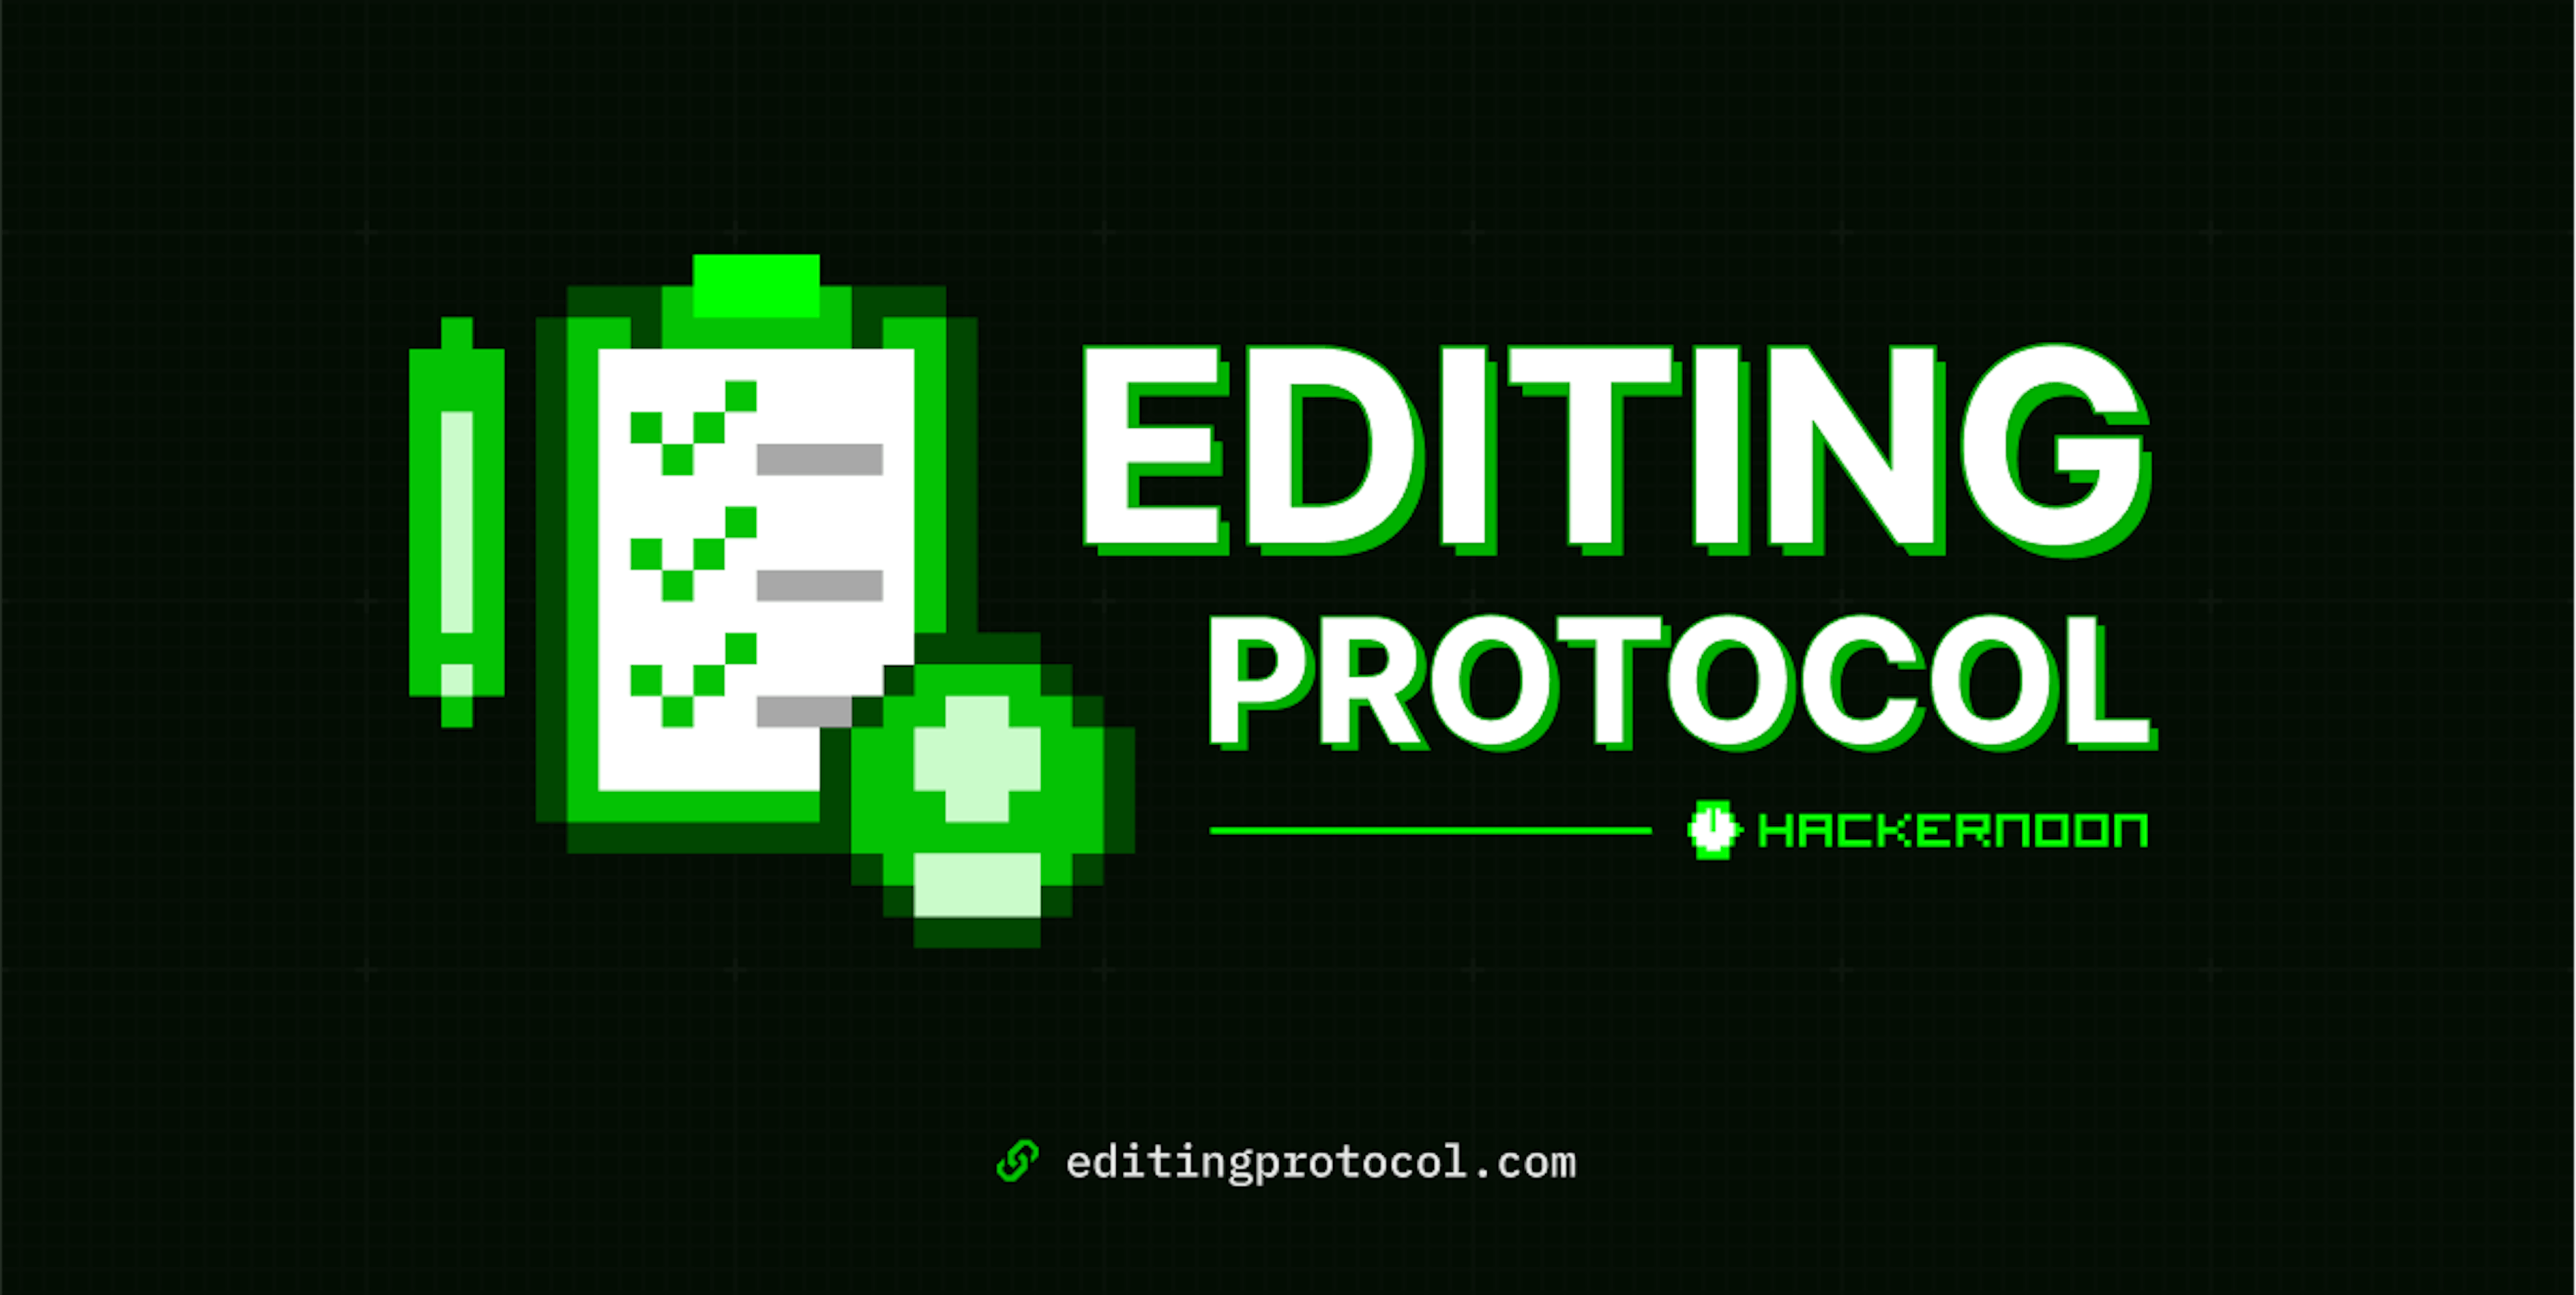 featured image - The HackerNoon Editing Protocol